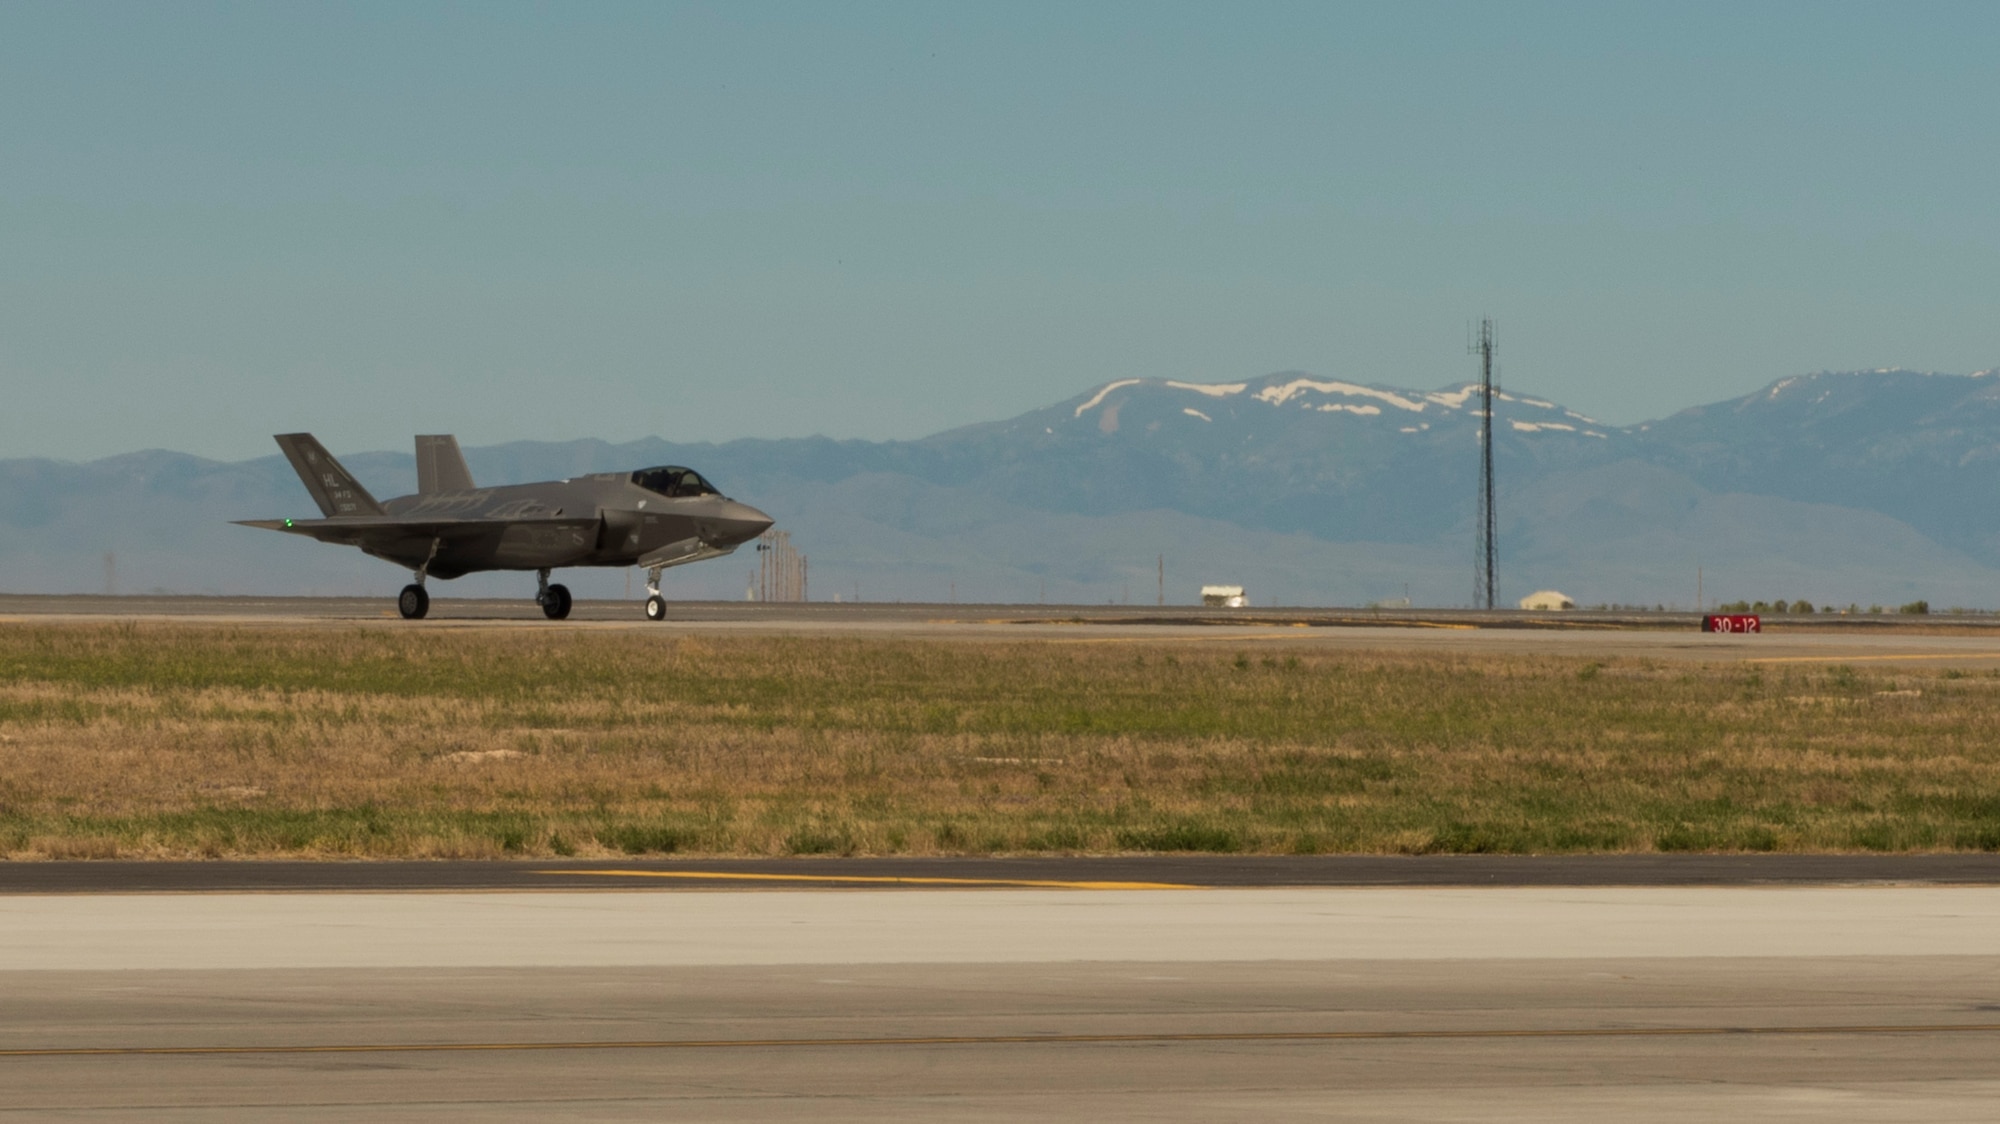 An F-35A lands on the runway at Mountain Home Air Force Base, Idaho, June 3, 2016. The mock deployment to Idaho marks the first out-of-state training mission for Hill Air Force Base's operational 5th generation aircraft. (U.S. Air Force Photo by Airman Alaysia Berry/RELEASED)